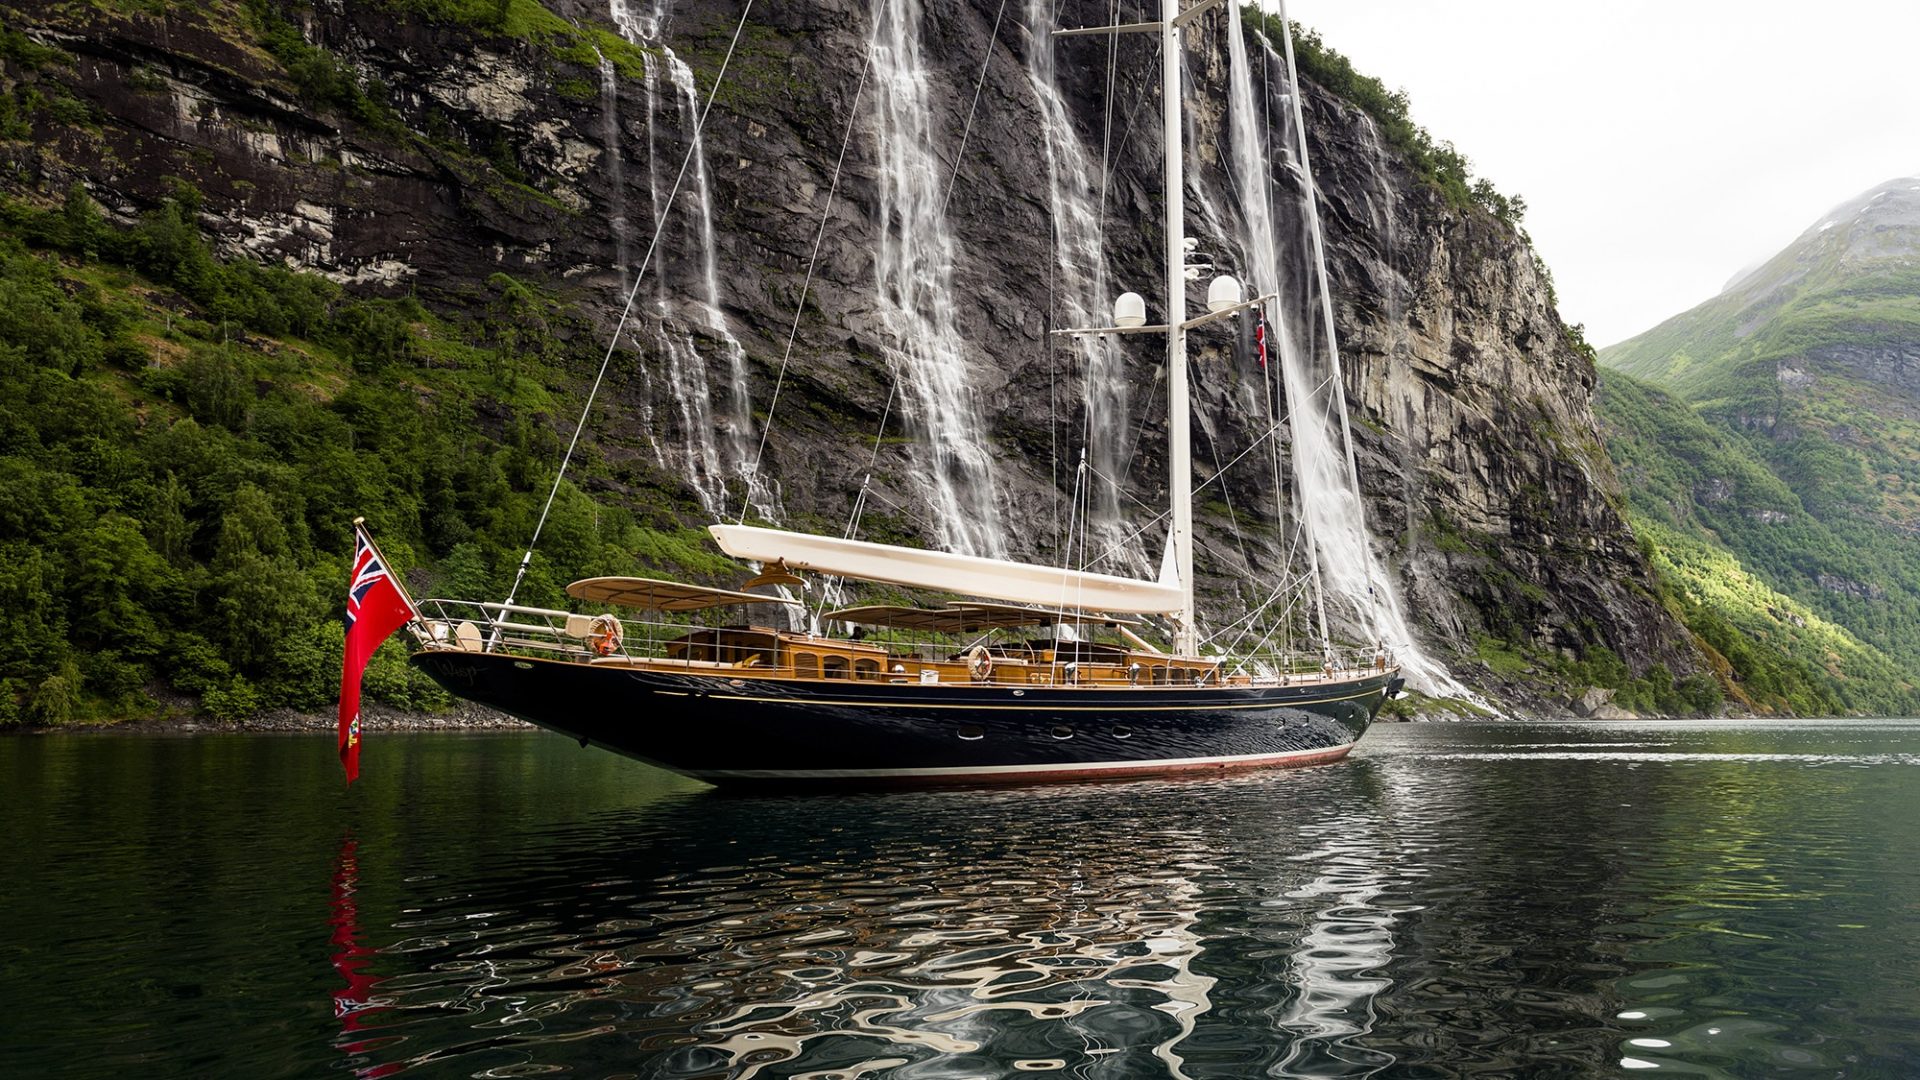 Yacht Wisp cruising the Geirangerfjord, a 156 foot (48 meter) sailing yacht built by Royal Huisman and designed by Hoek Design.